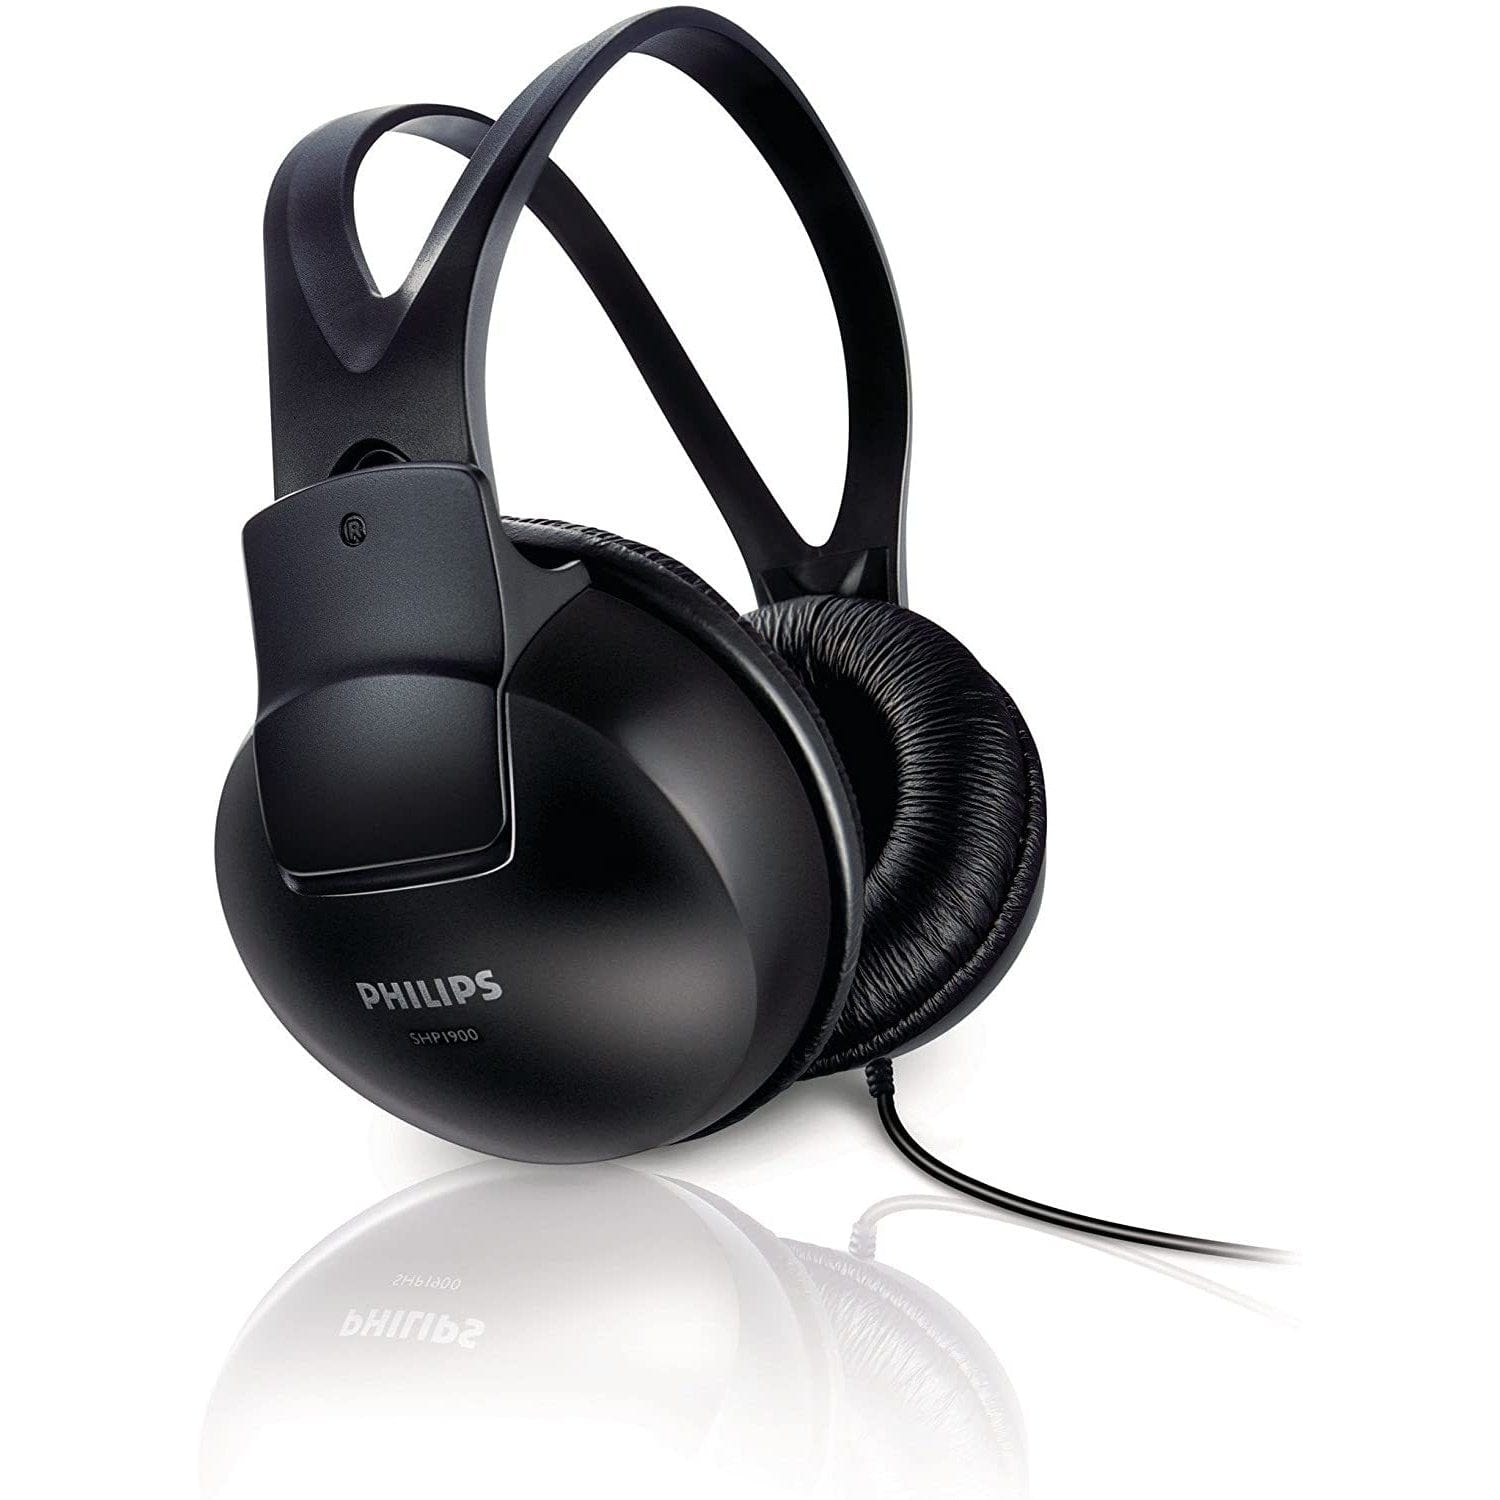 PHILIPS SHP1900 STEREO OVER-EAR HEADPHONES - BLACK [ACCESSORIES]